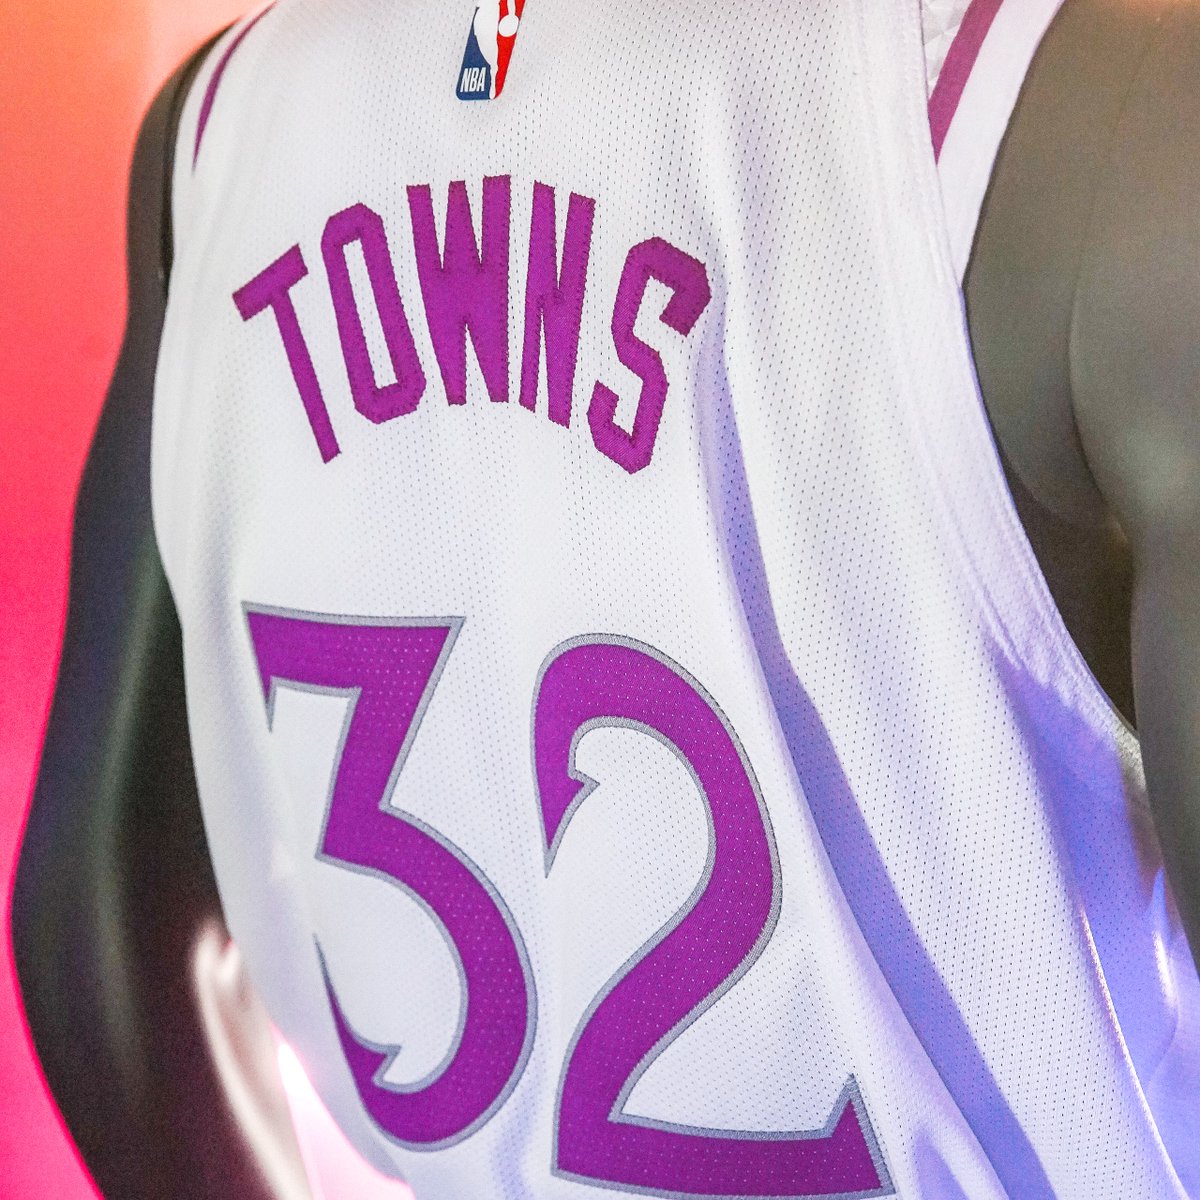 Timberwolves pay tribute to Prince with 'Purple Rain'-inspired unis